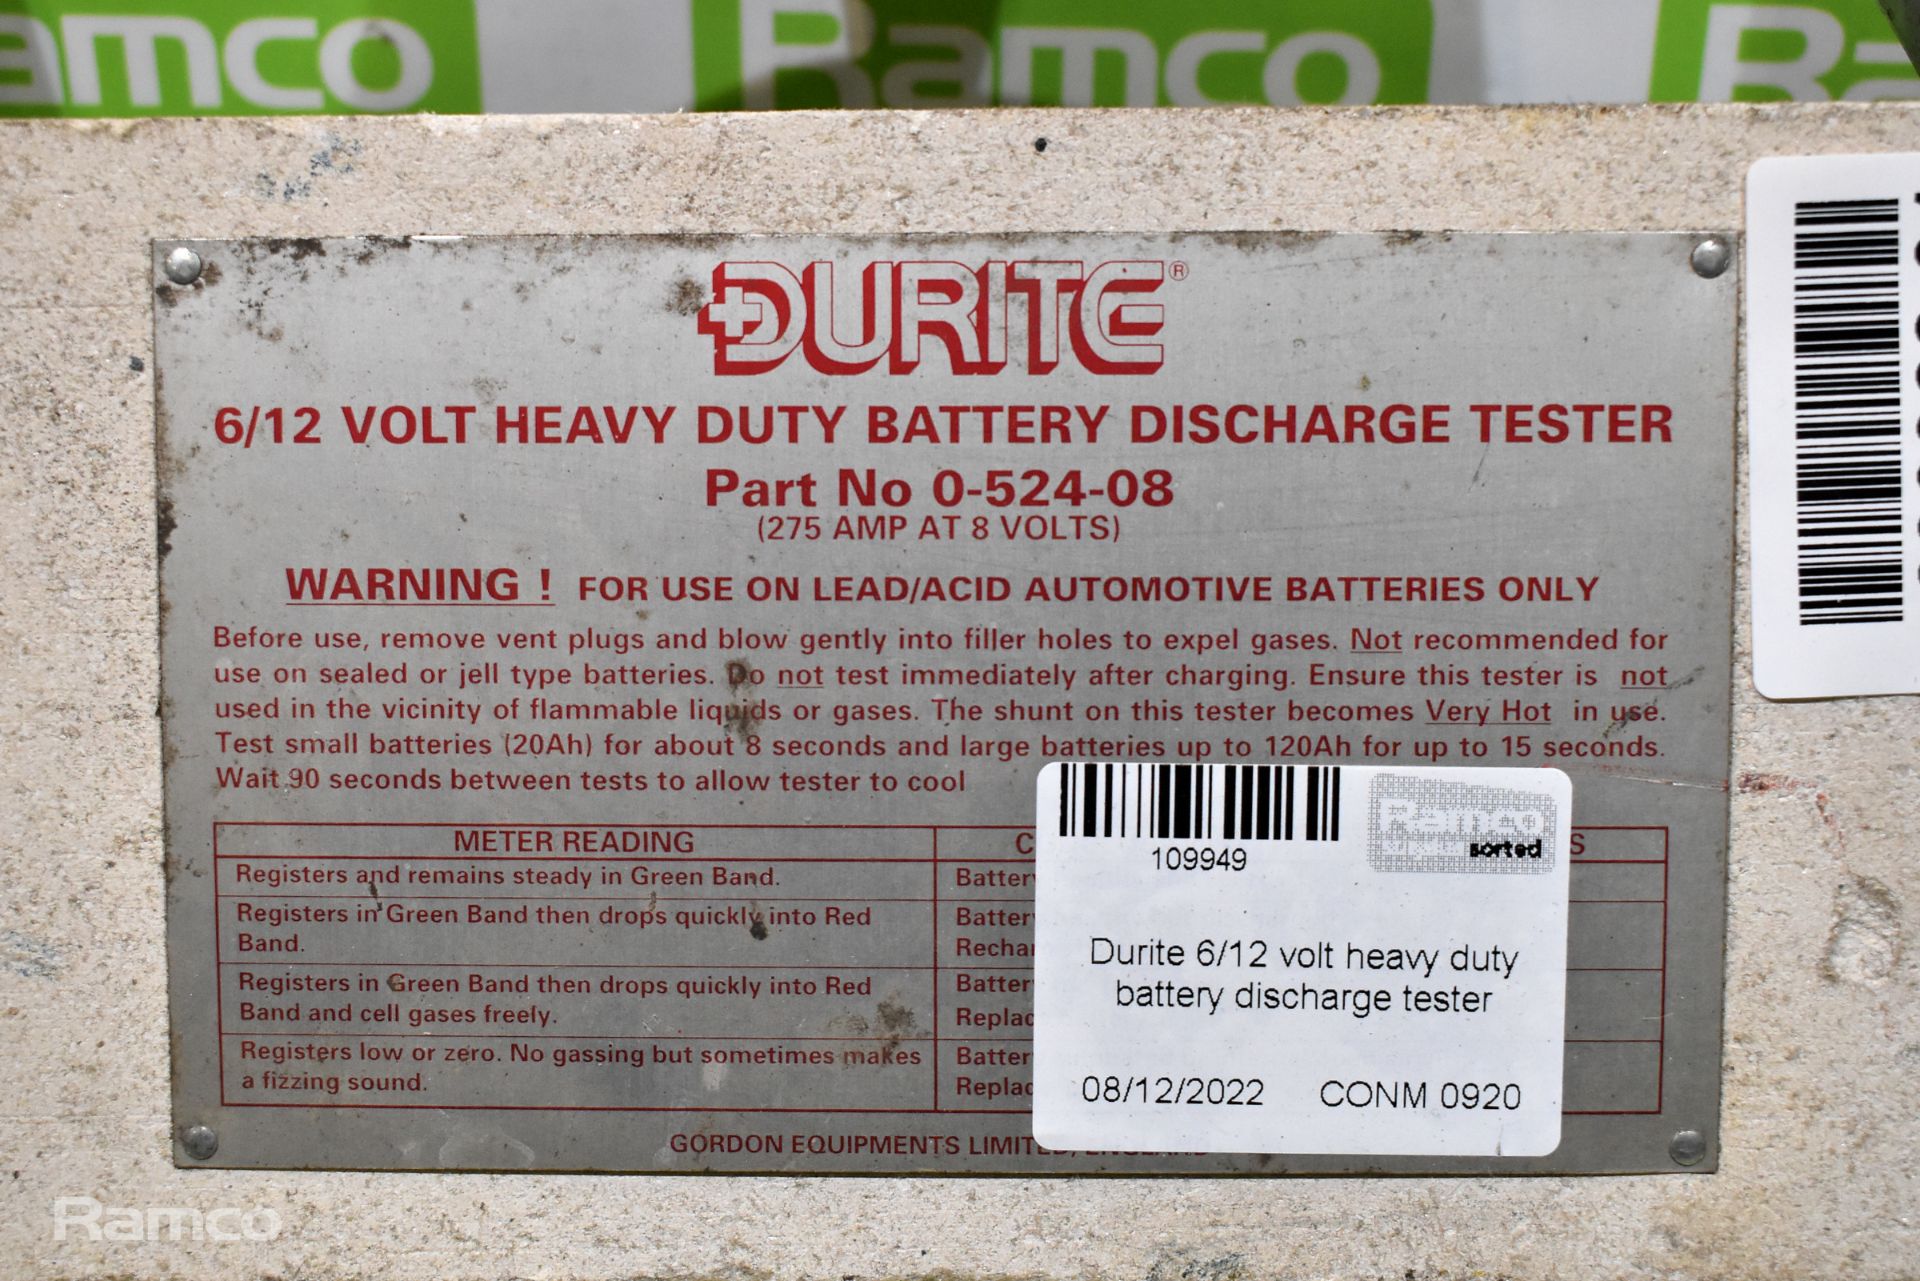 Durite 6/12 volt heavy duty battery discharge tester - Image 2 of 4